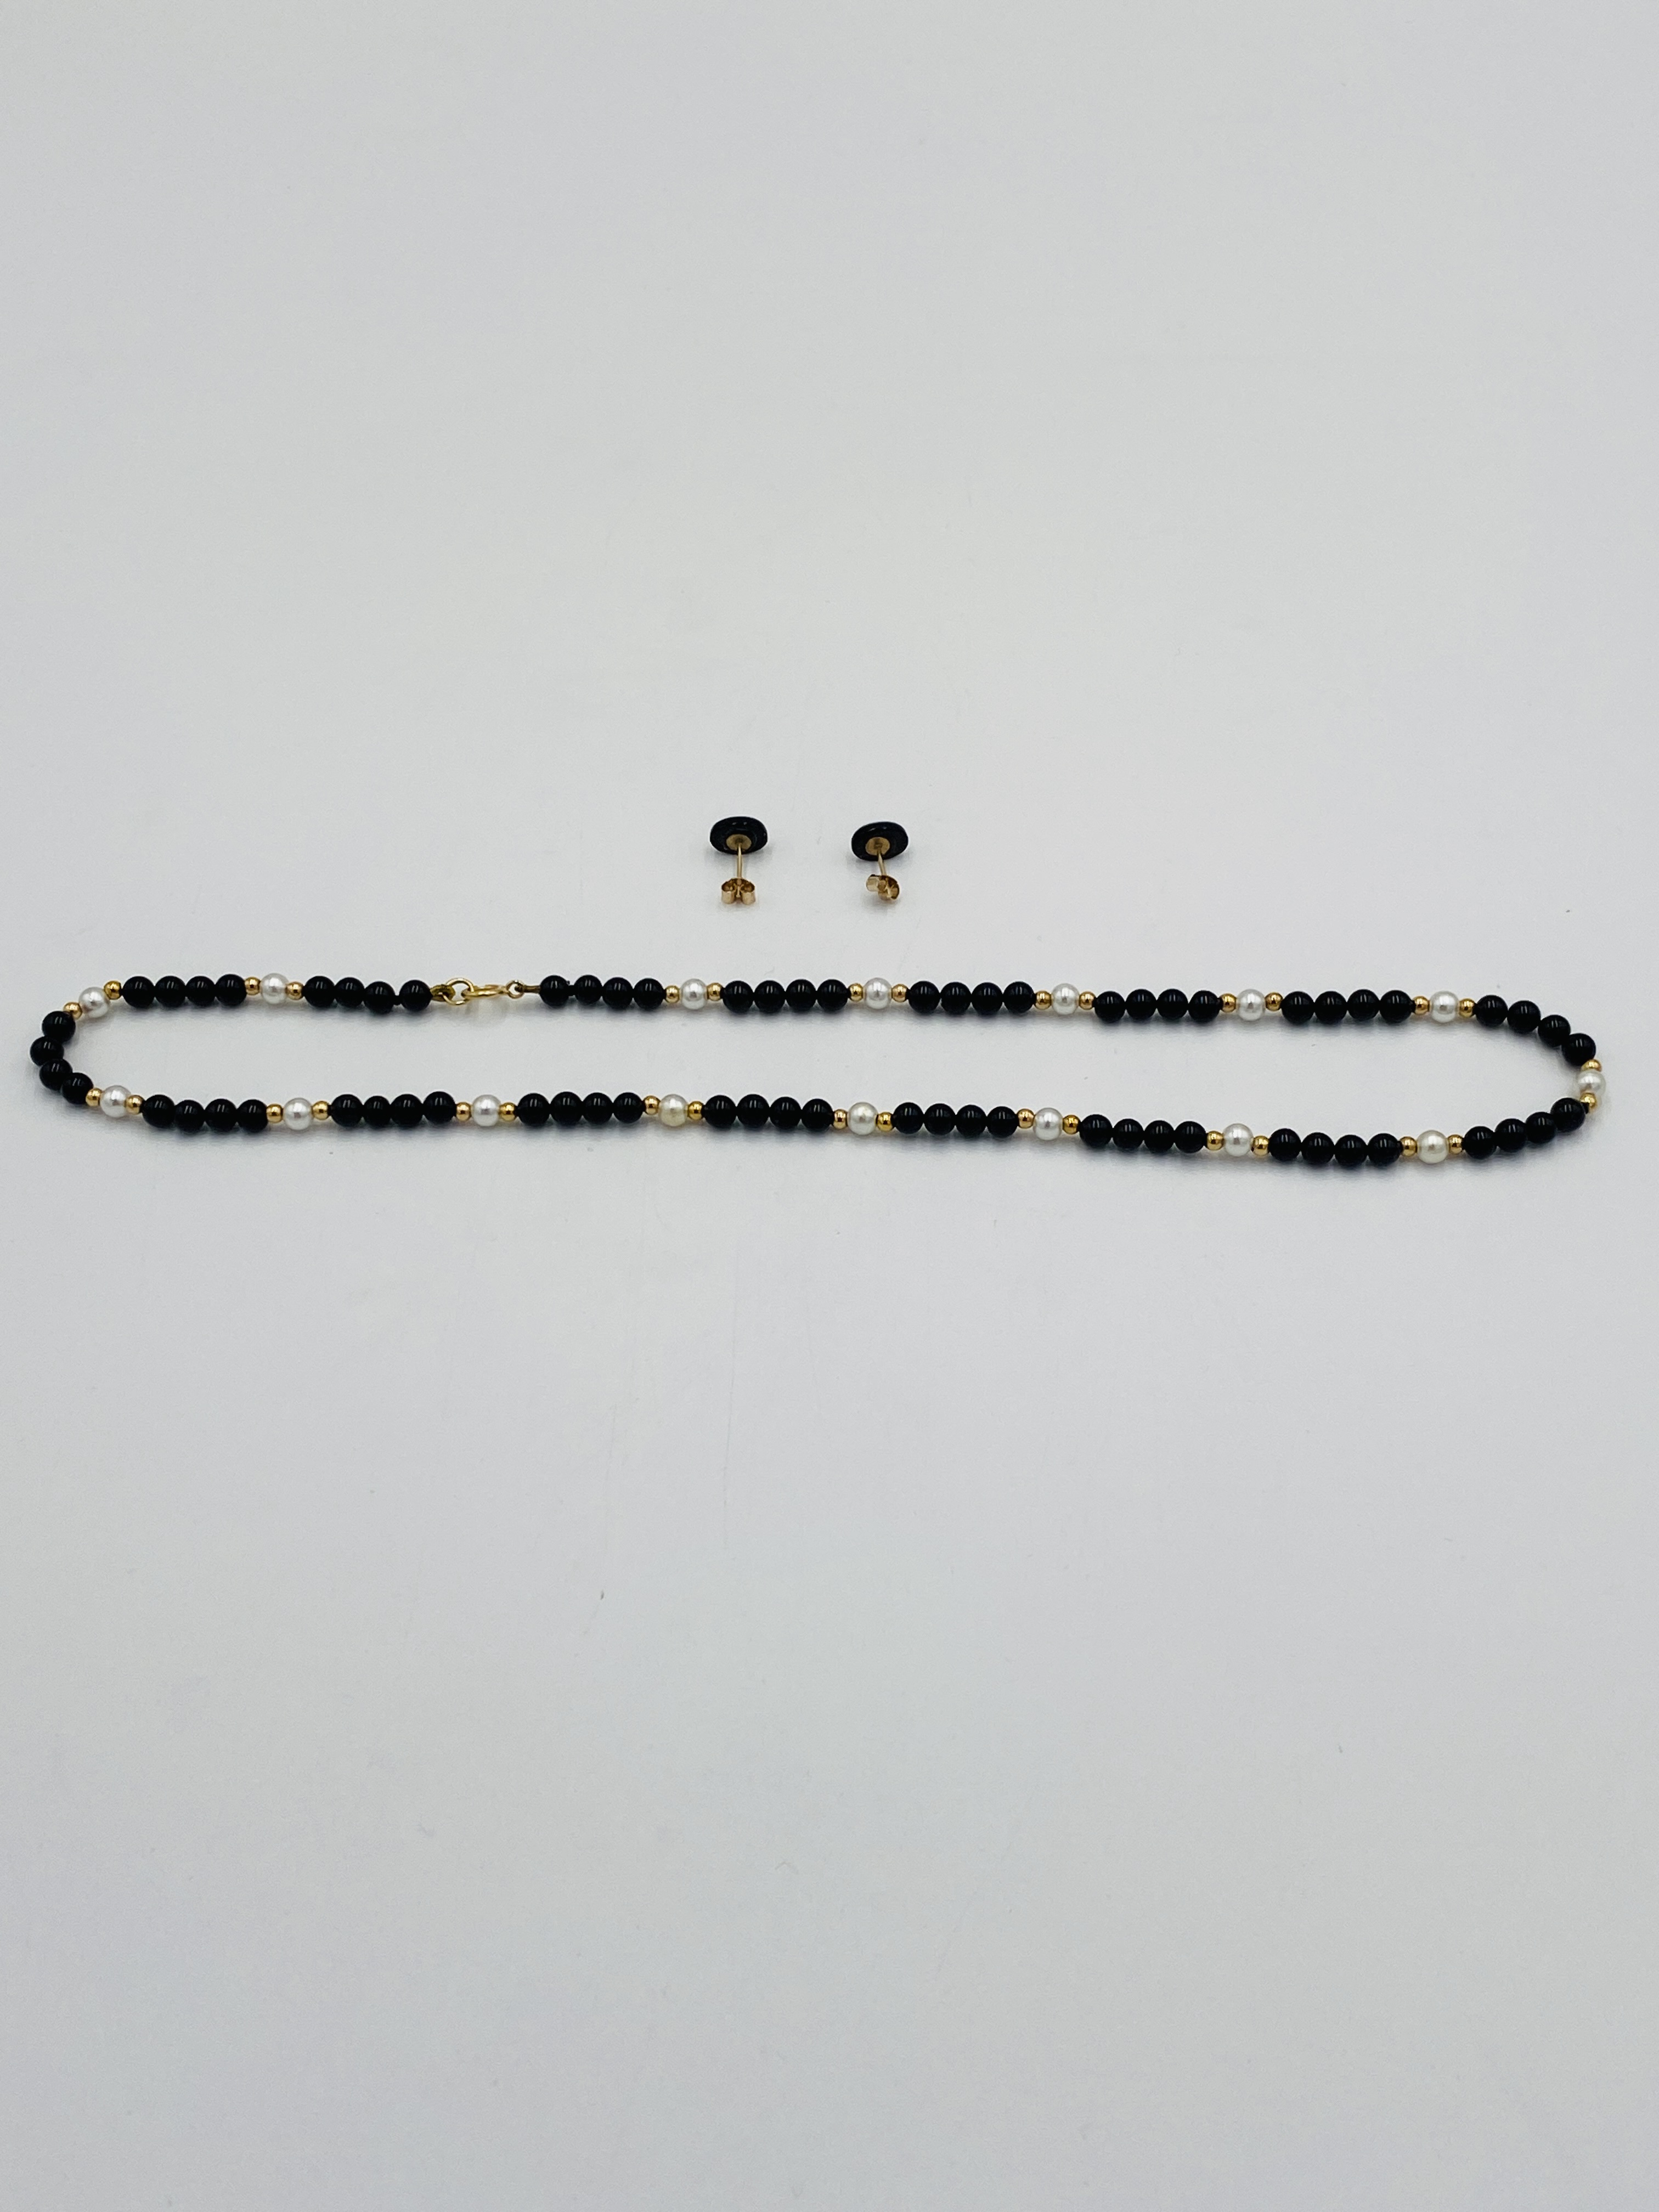 Bead necklace with 9ct gold clasp,together with matching earrings - Image 6 of 6